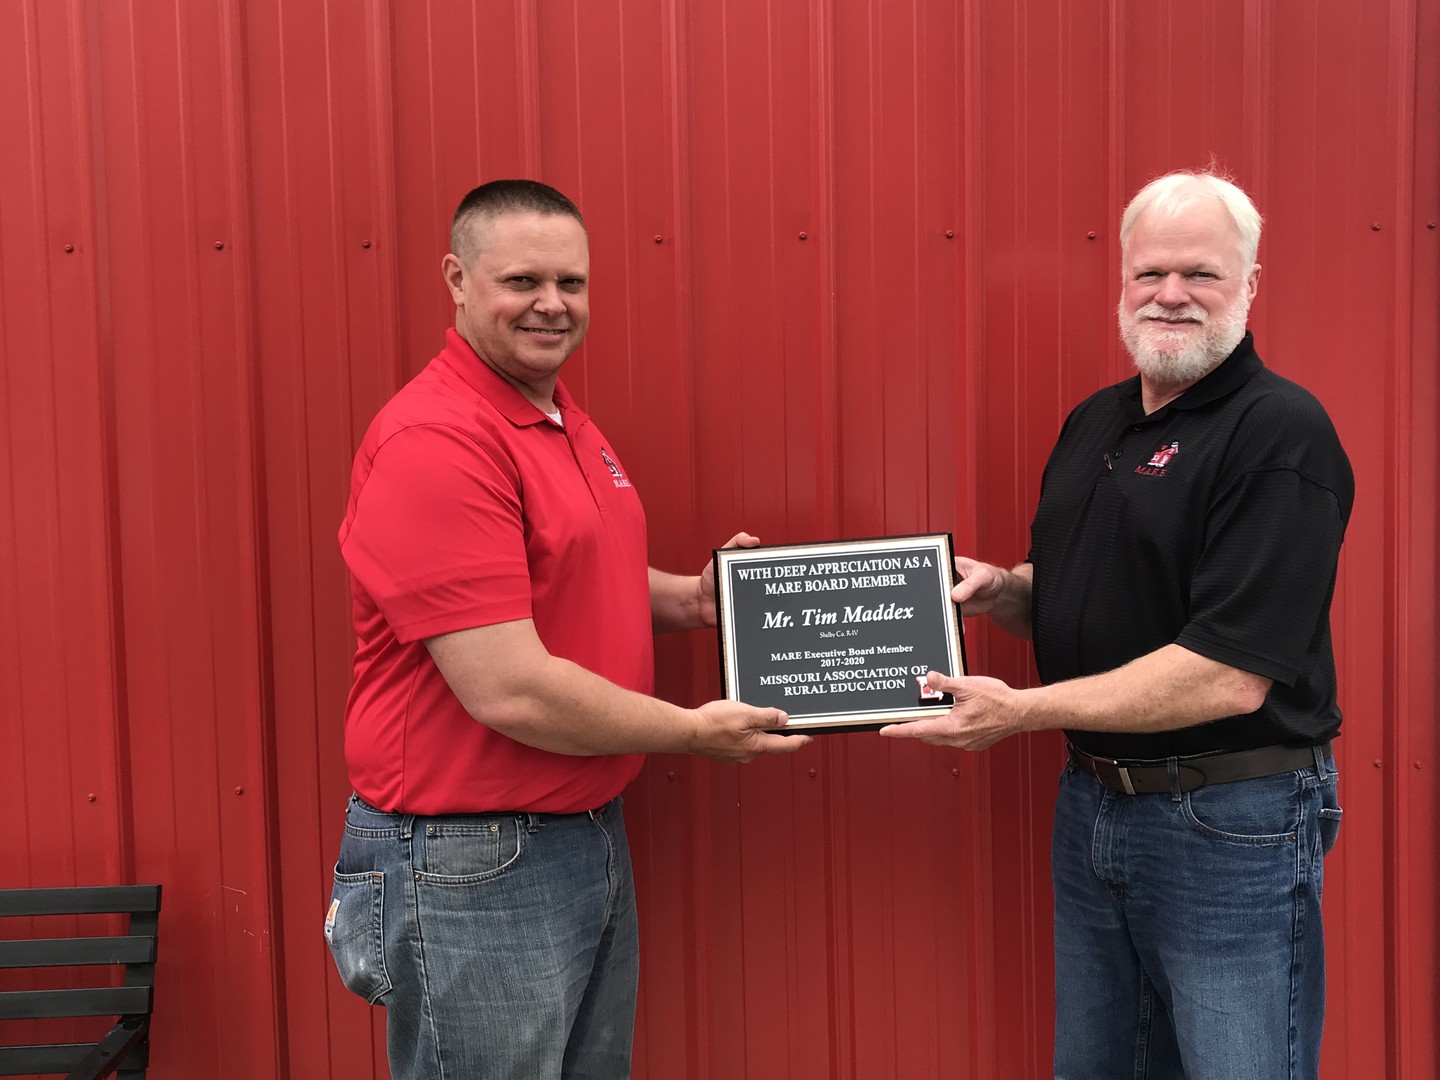 Mr. Tim Maddex receiving his service plaque from Kevin Sandlin